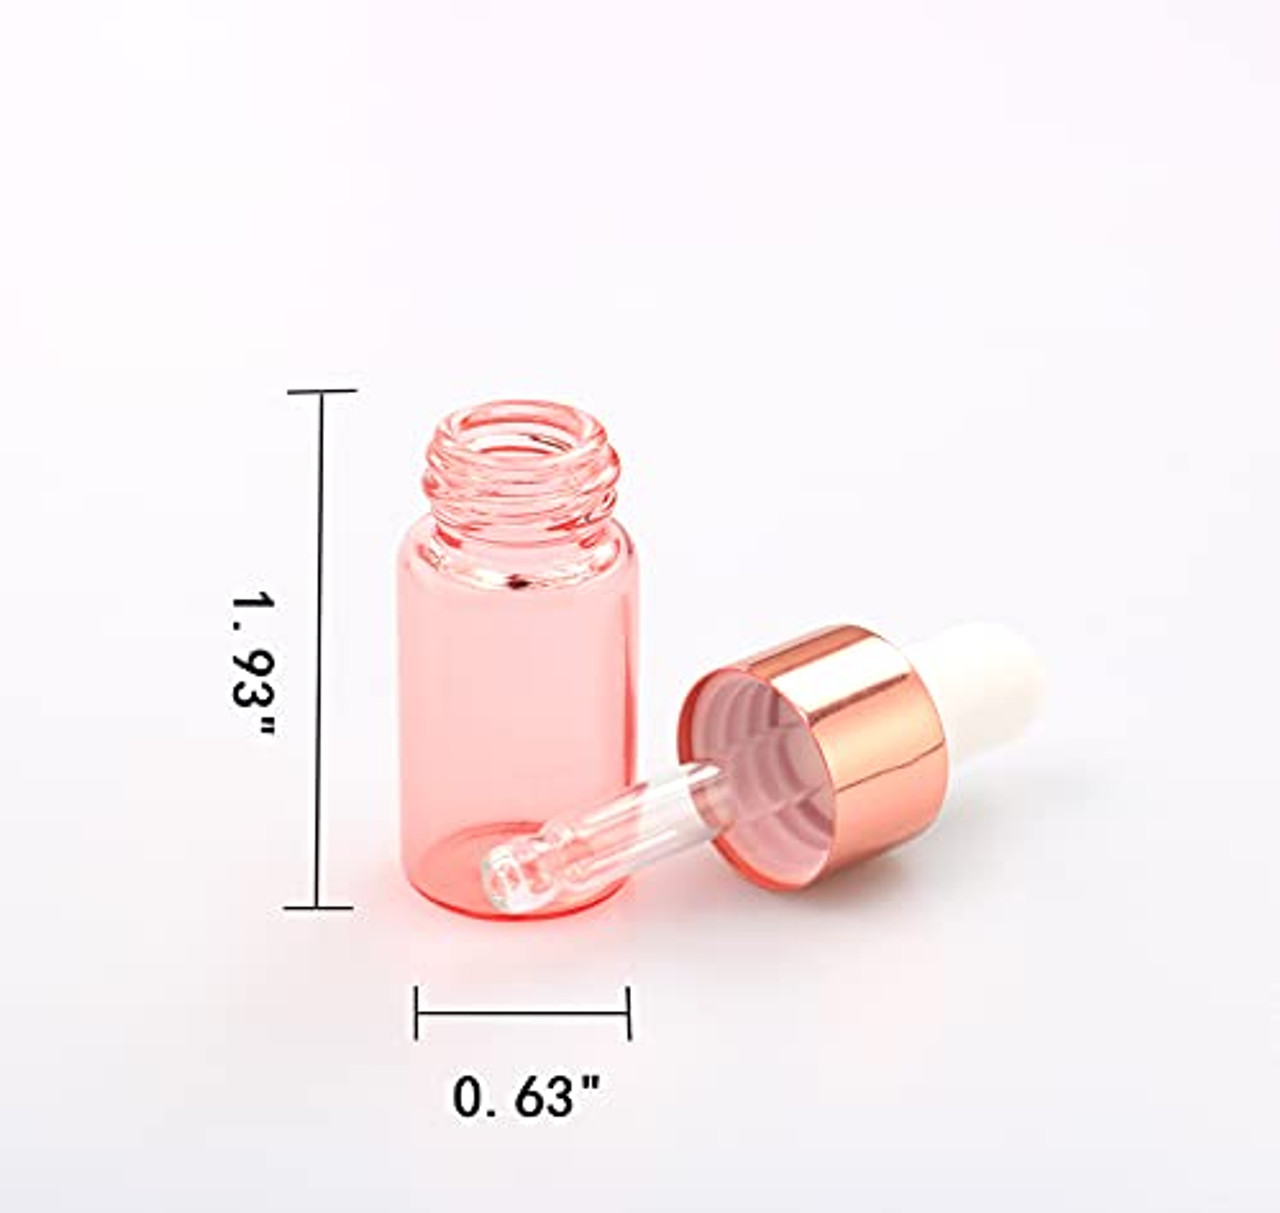 Plastic Bottles White with Pink Cap Beauty Liquid Containers - 8.5